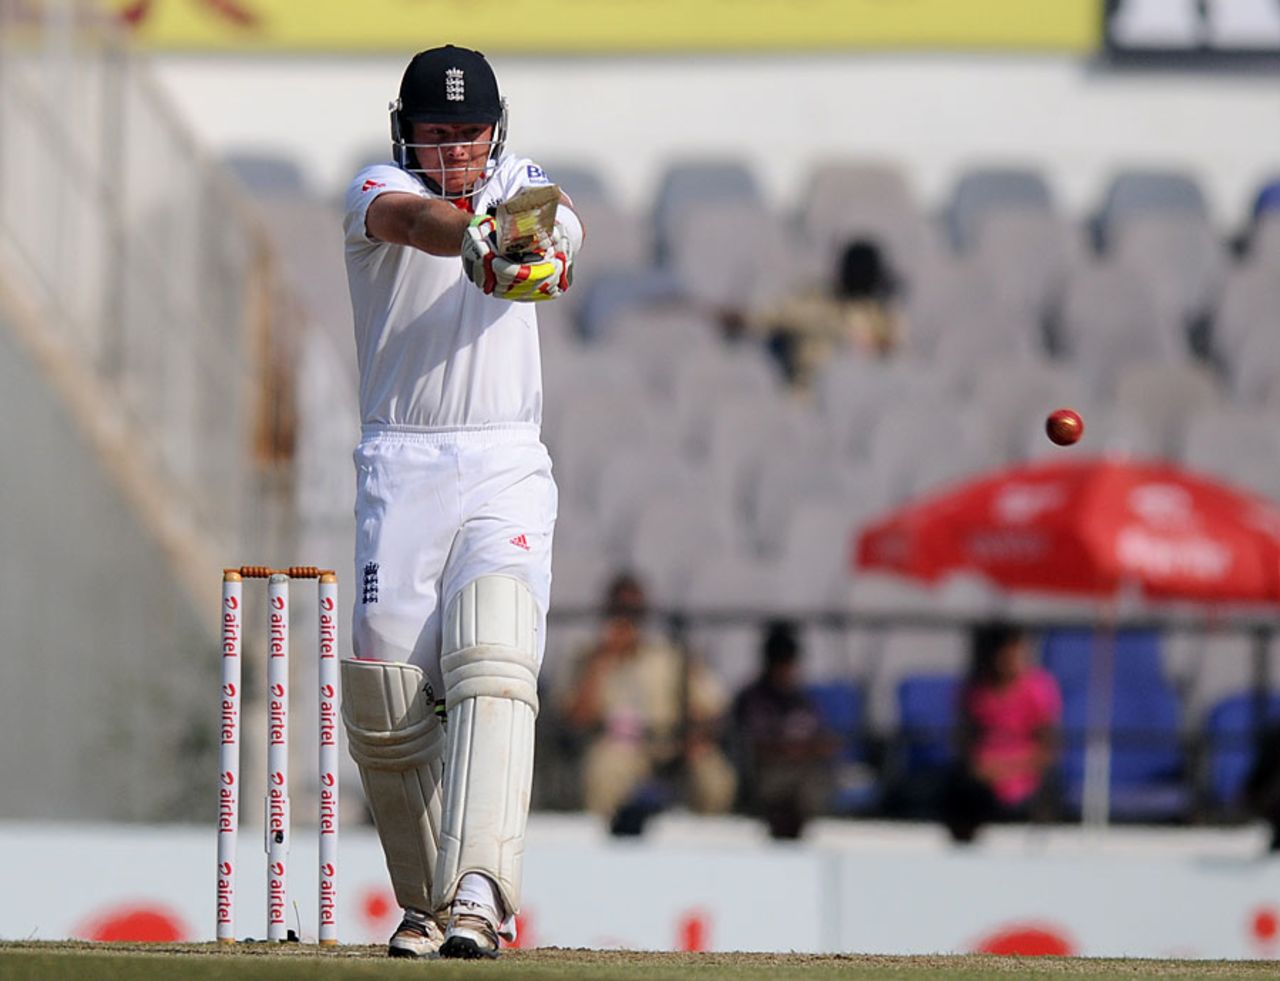 Ian Bell powers away a pull shot, India v England, 4th Test, Nagpur, 5th day, December 17, 2012